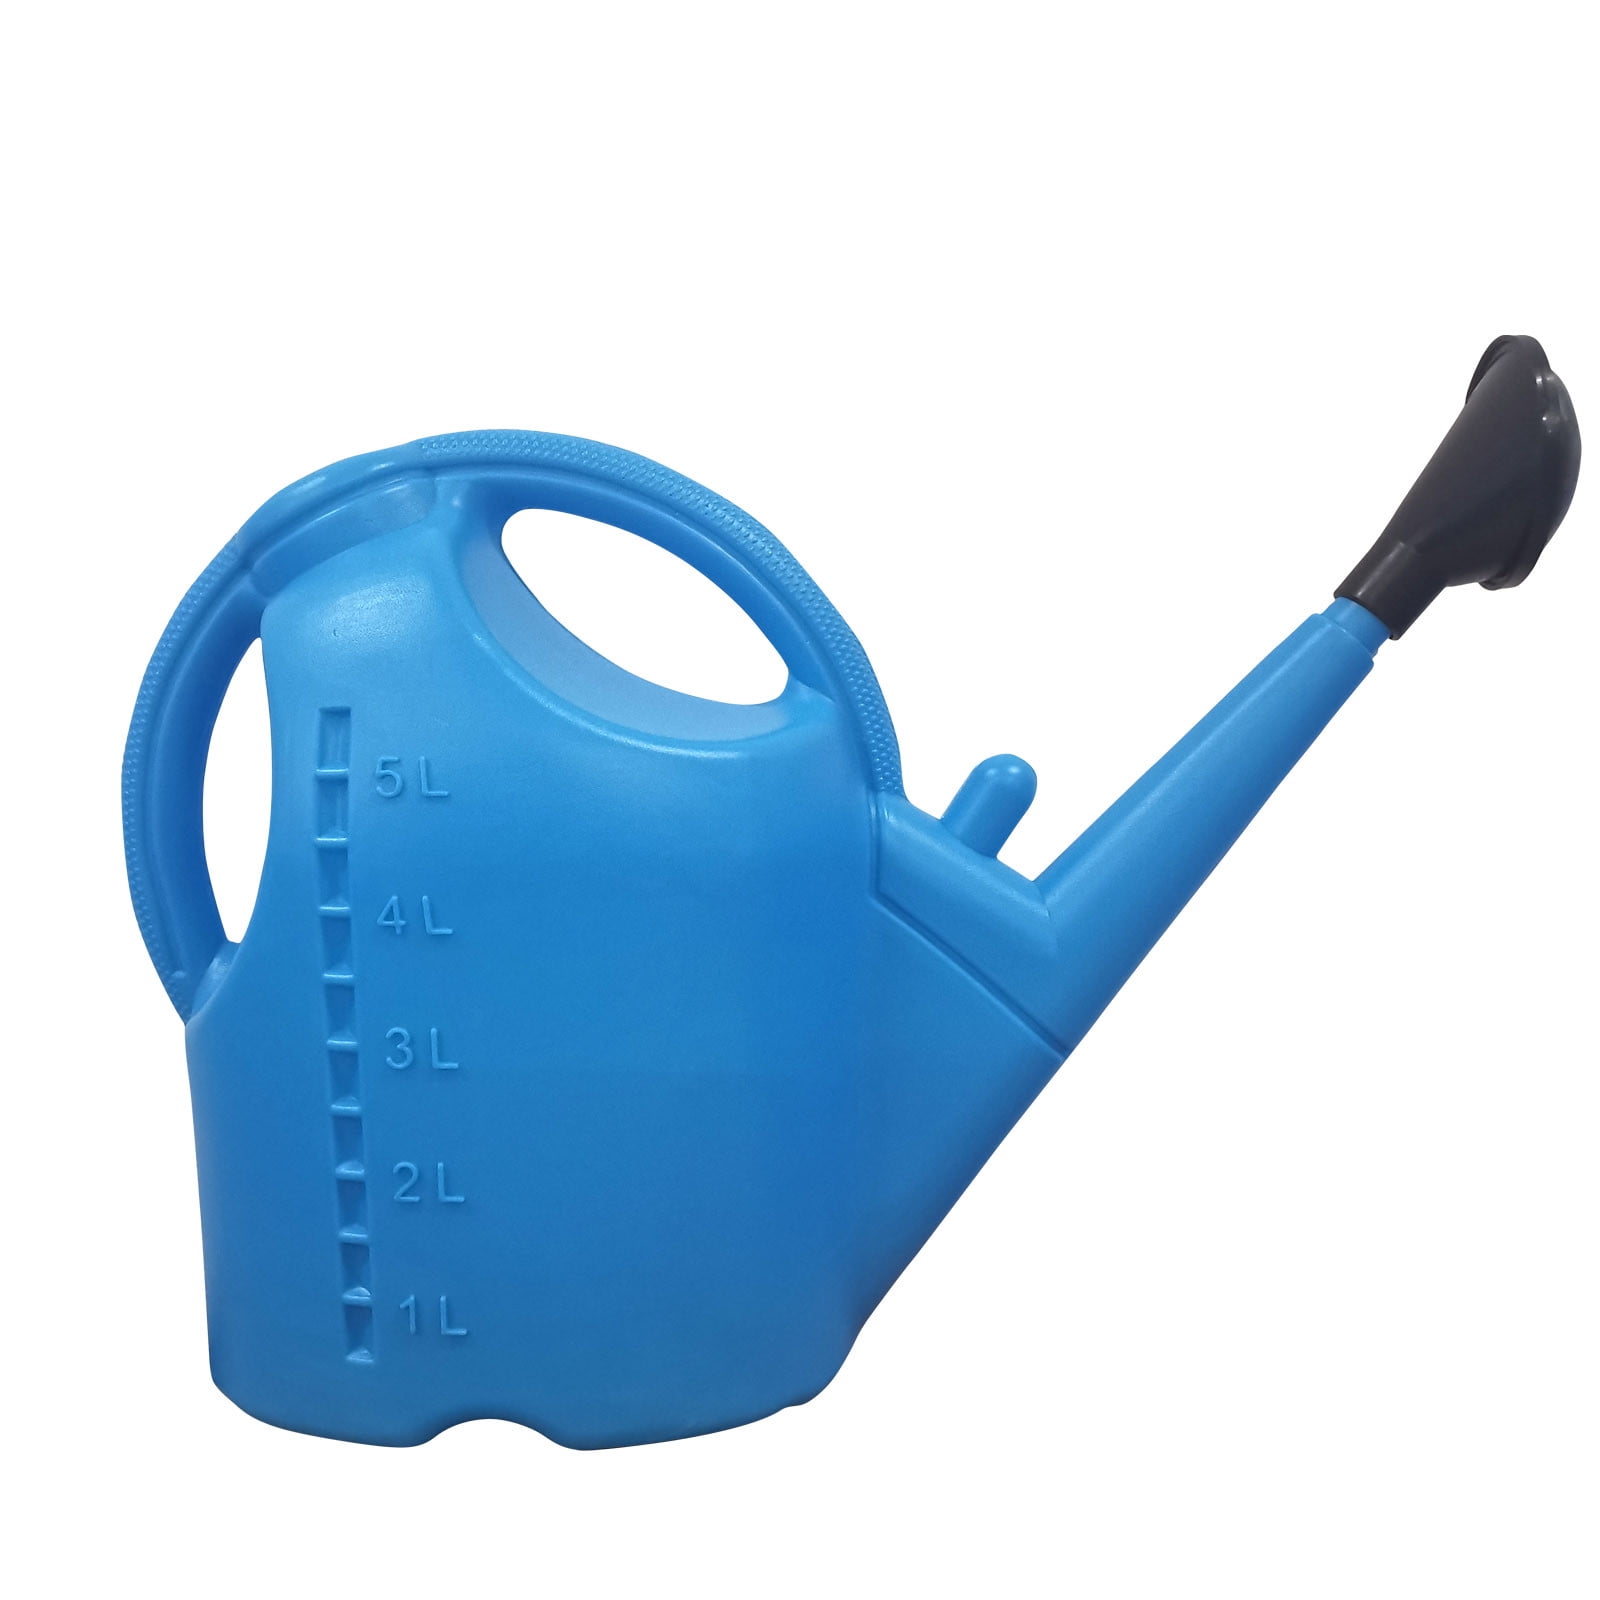 Details about   WATERING CAN INDOOR OUTDOOR GARDENING HOUSE PLANTS  10L 